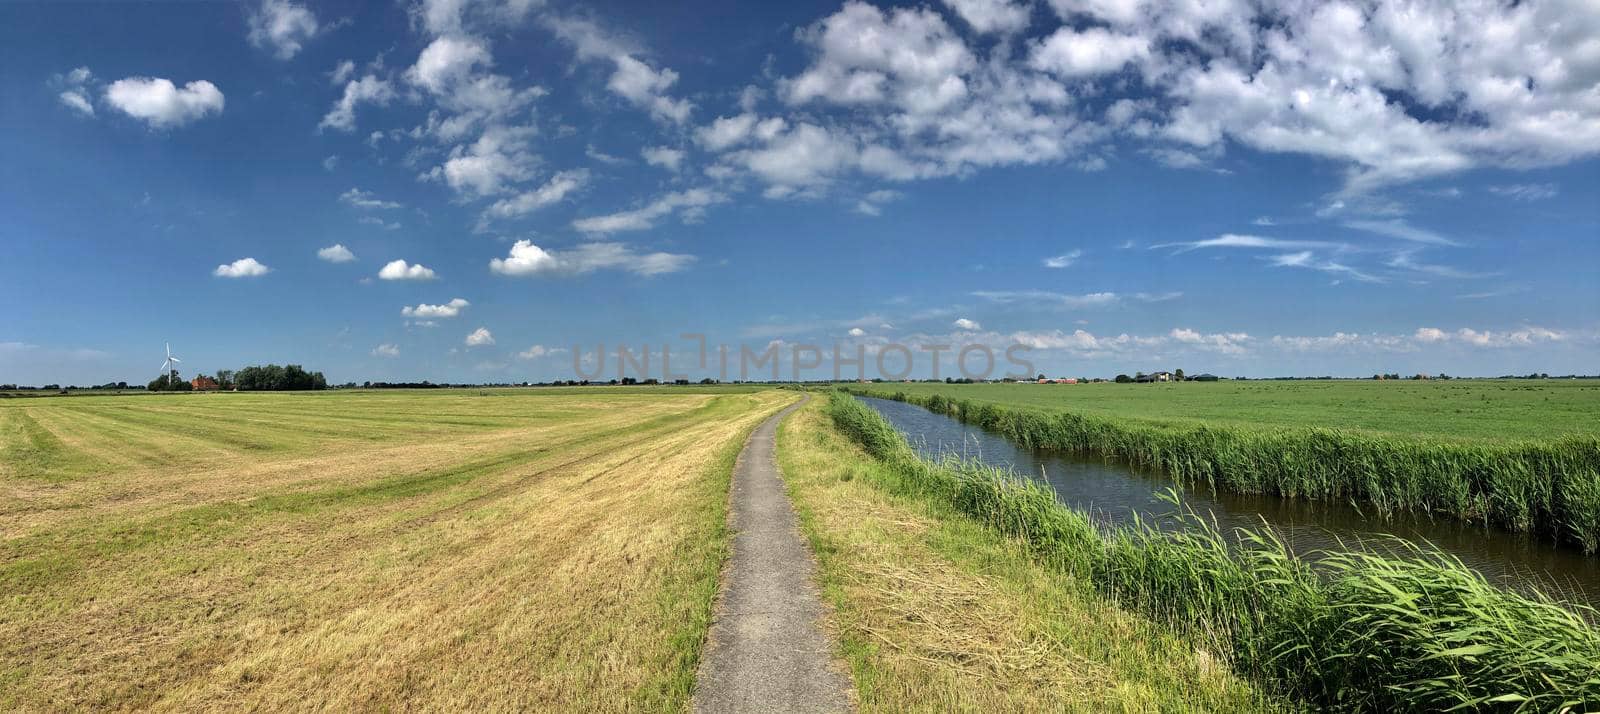 Farmland panorama from around Greonterp in Friesland, The Netherlands